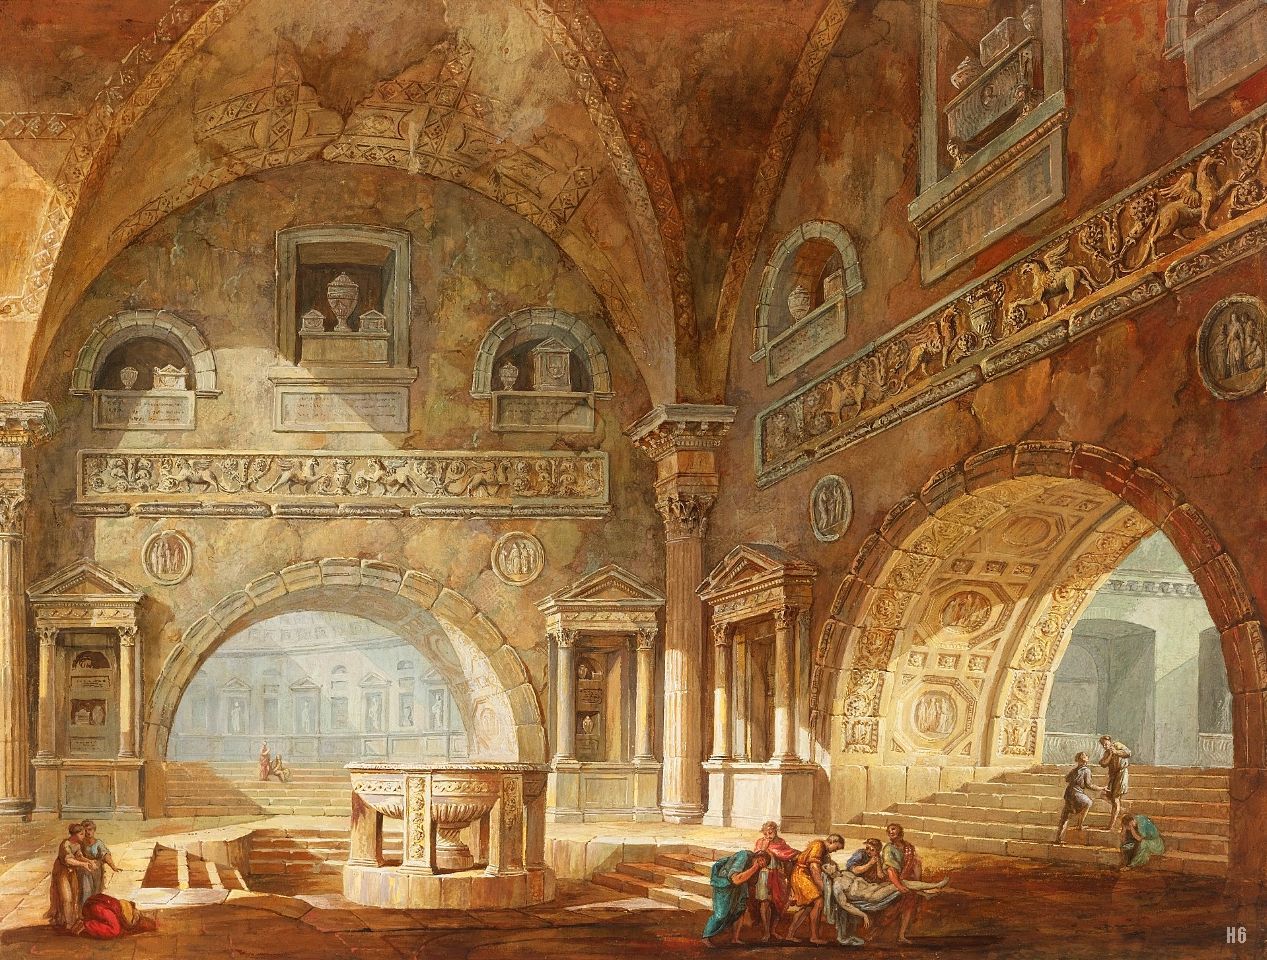 Interior of a Roman building with figures carrying a body. Charles Louis Clerisseau. French. 1721-1820. gouache /paper.
http://hadrian6.tumblr.com